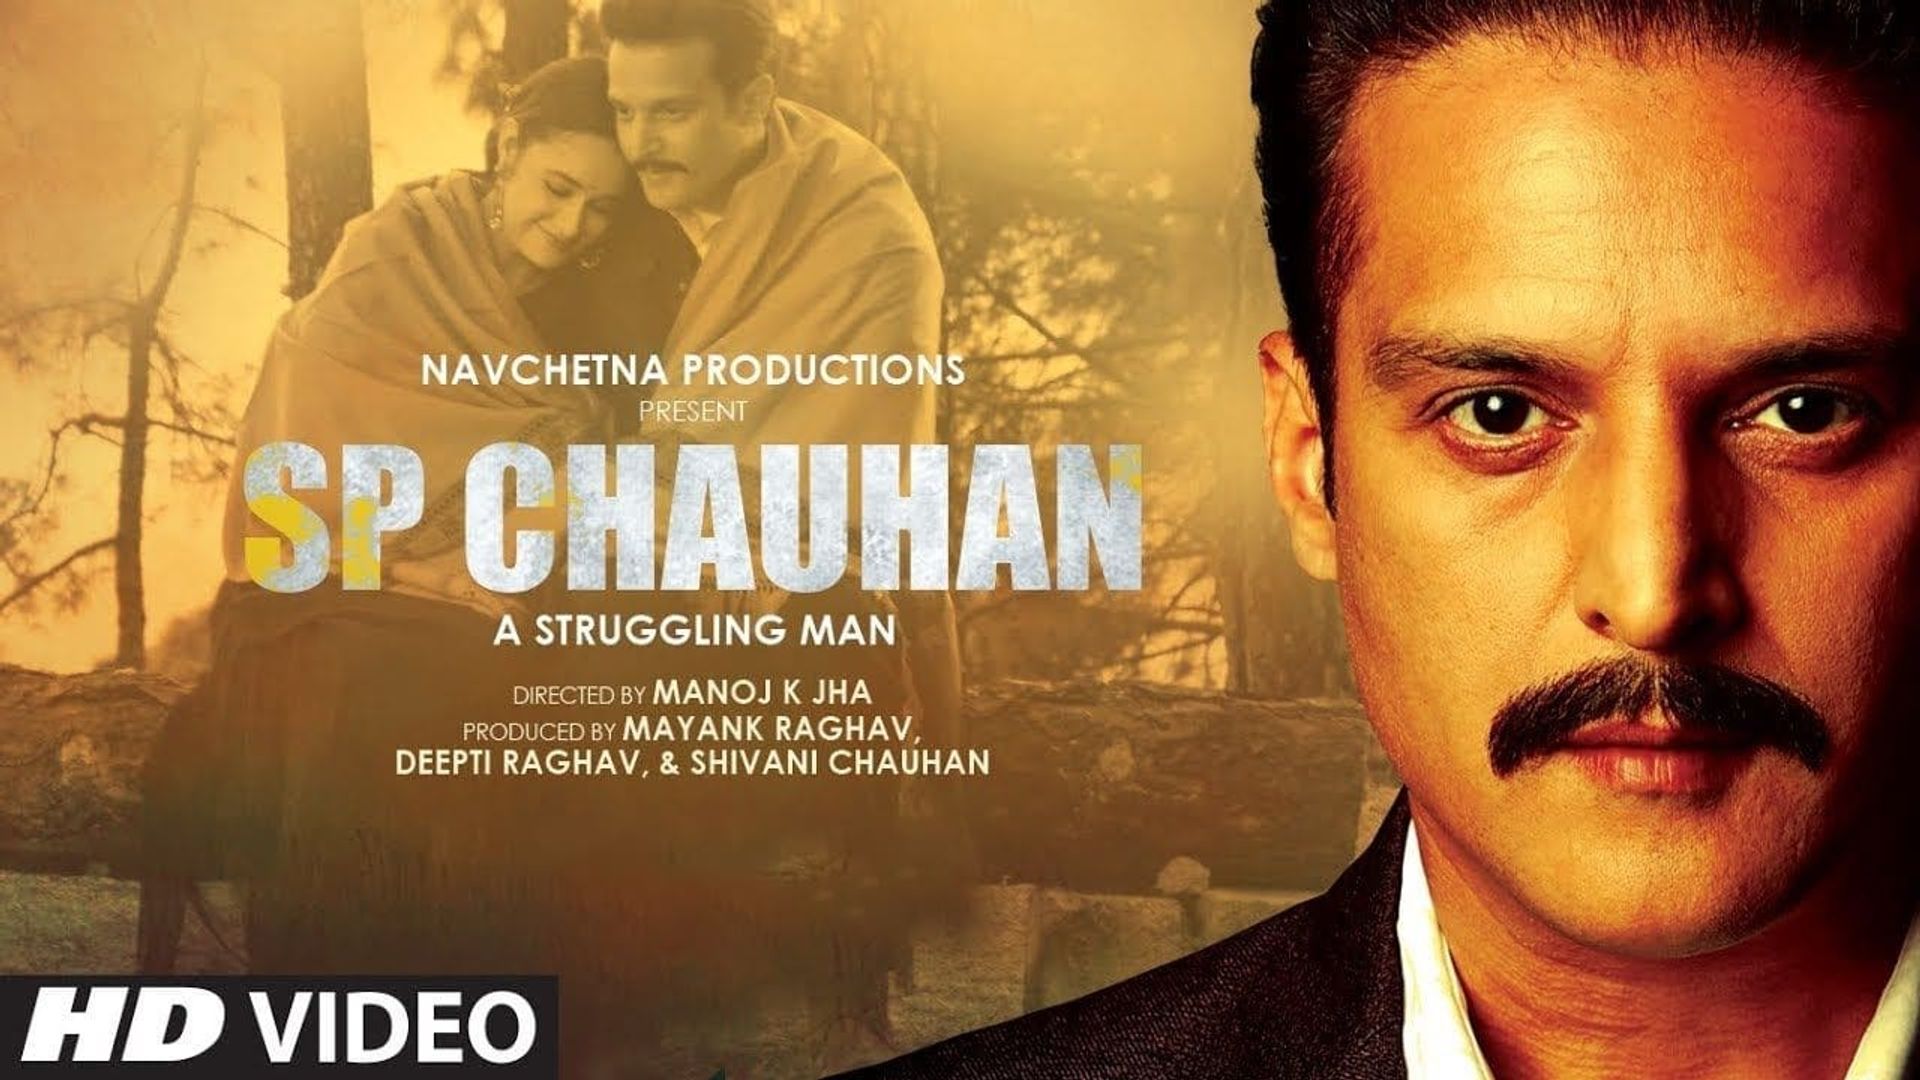 S.P. Chauhan background